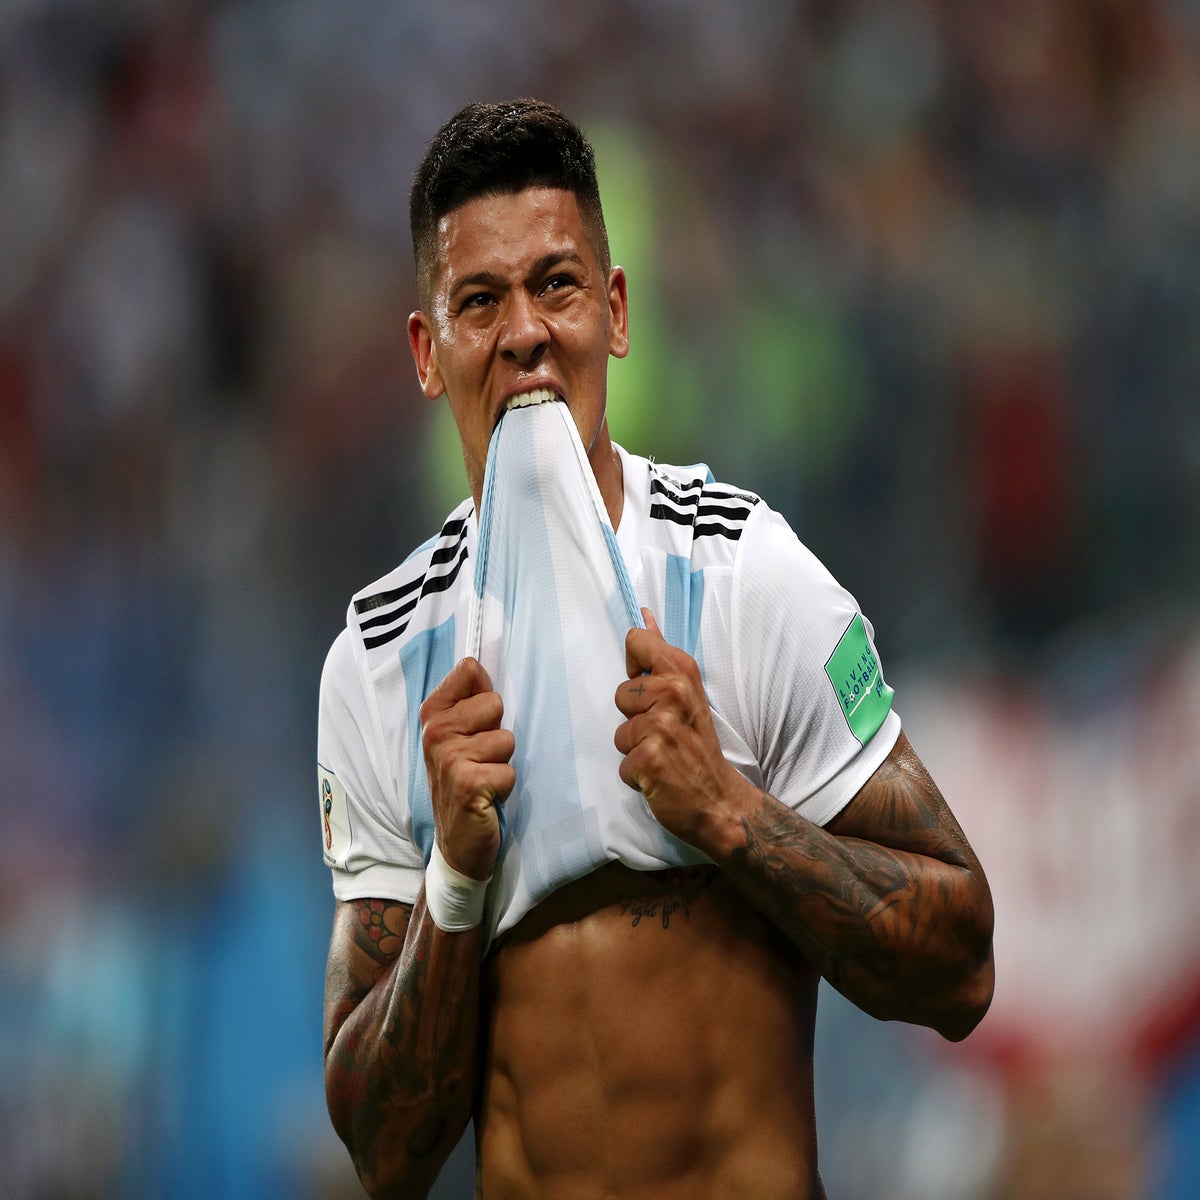 Argentina goalkeeper stuns with 'X-rated' act after World Cup final